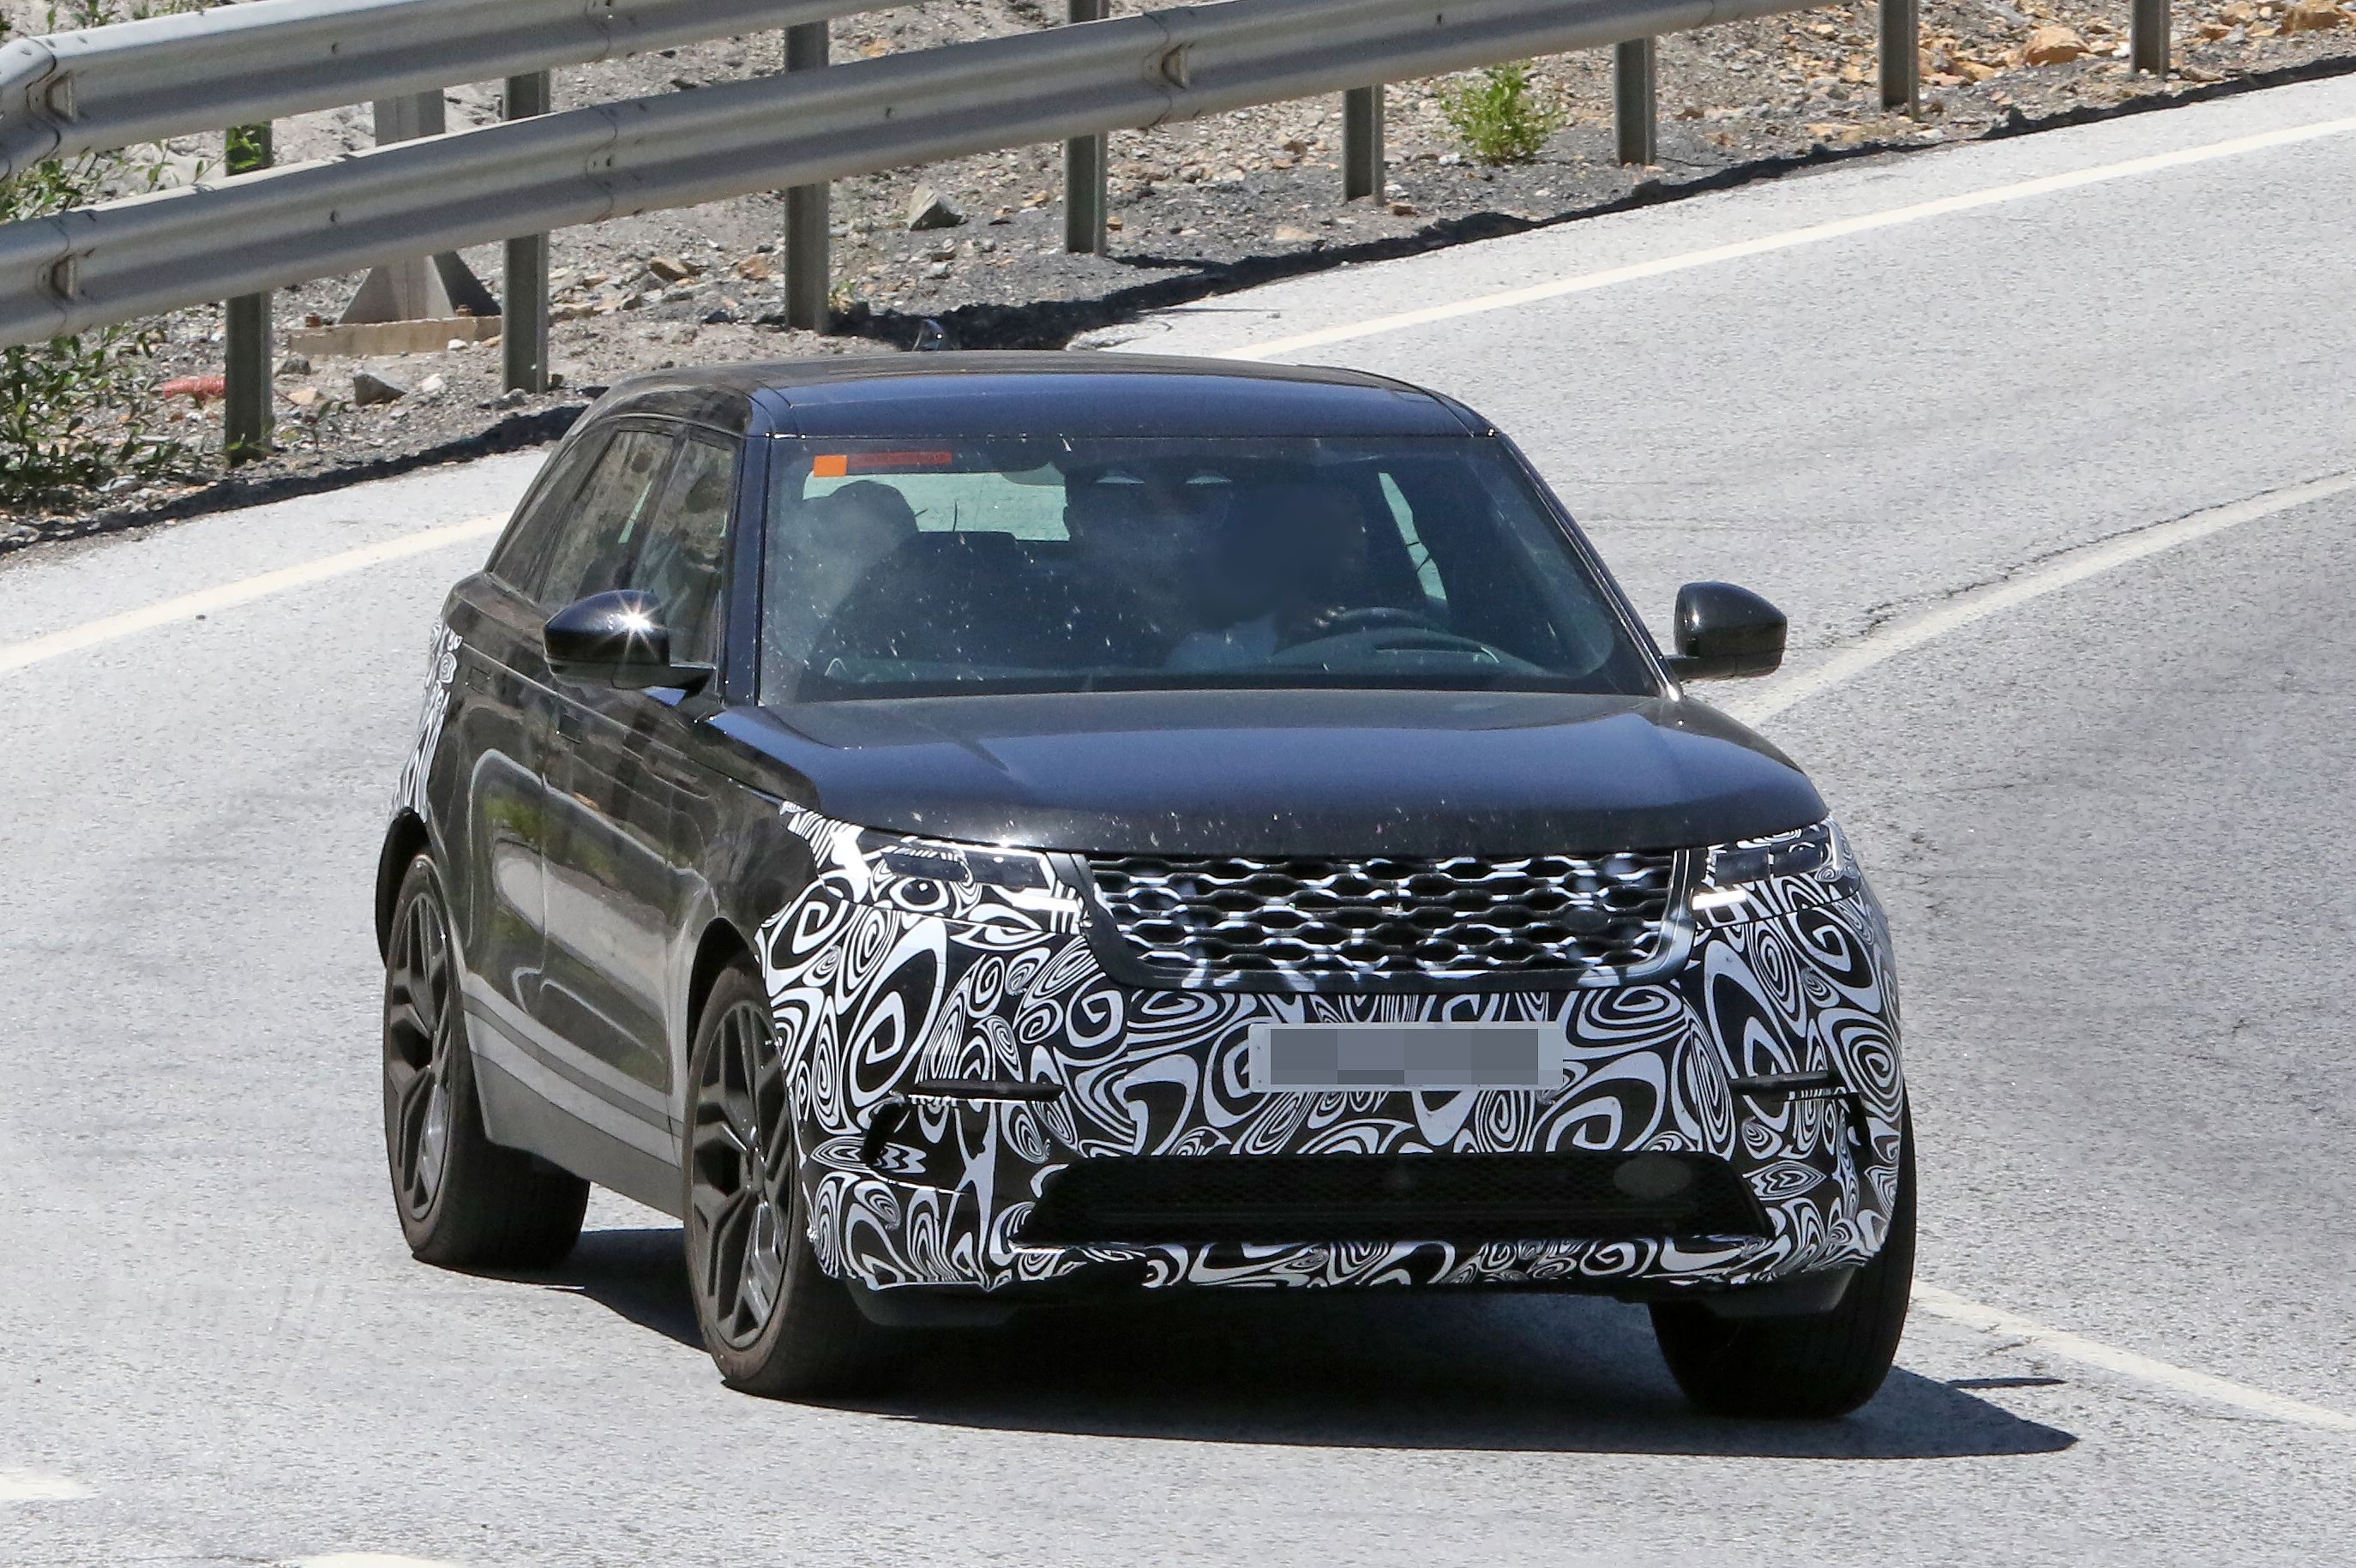 Land Rover Range Rover Velar Is About To Receive a Well-Deserved Facelift